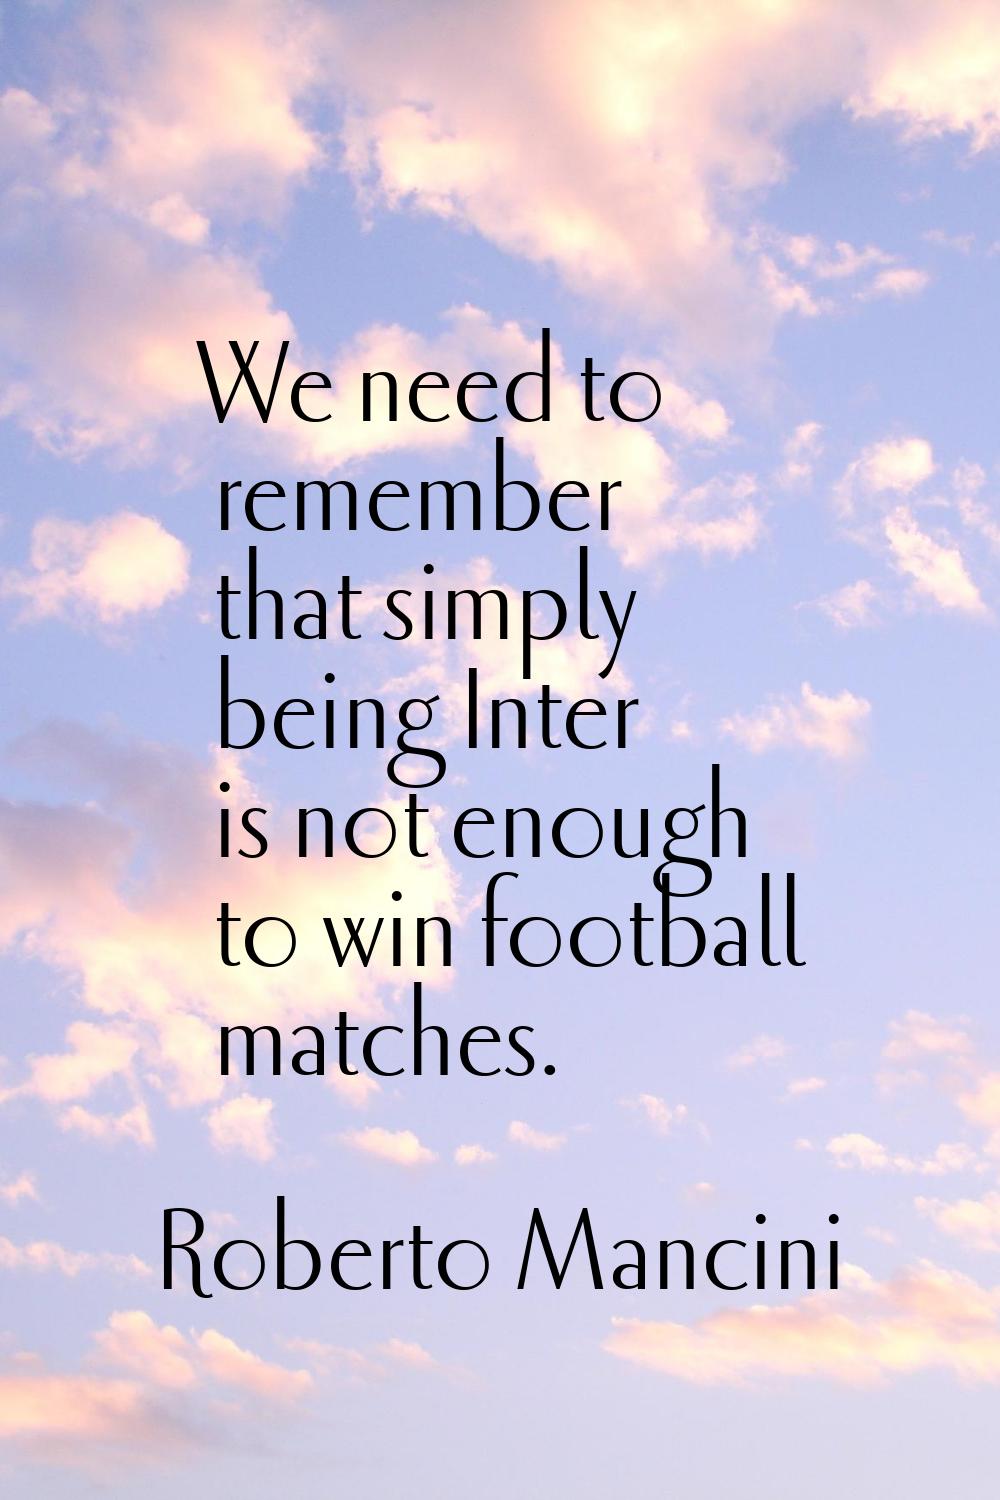 We need to remember that simply being Inter is not enough to win football matches.